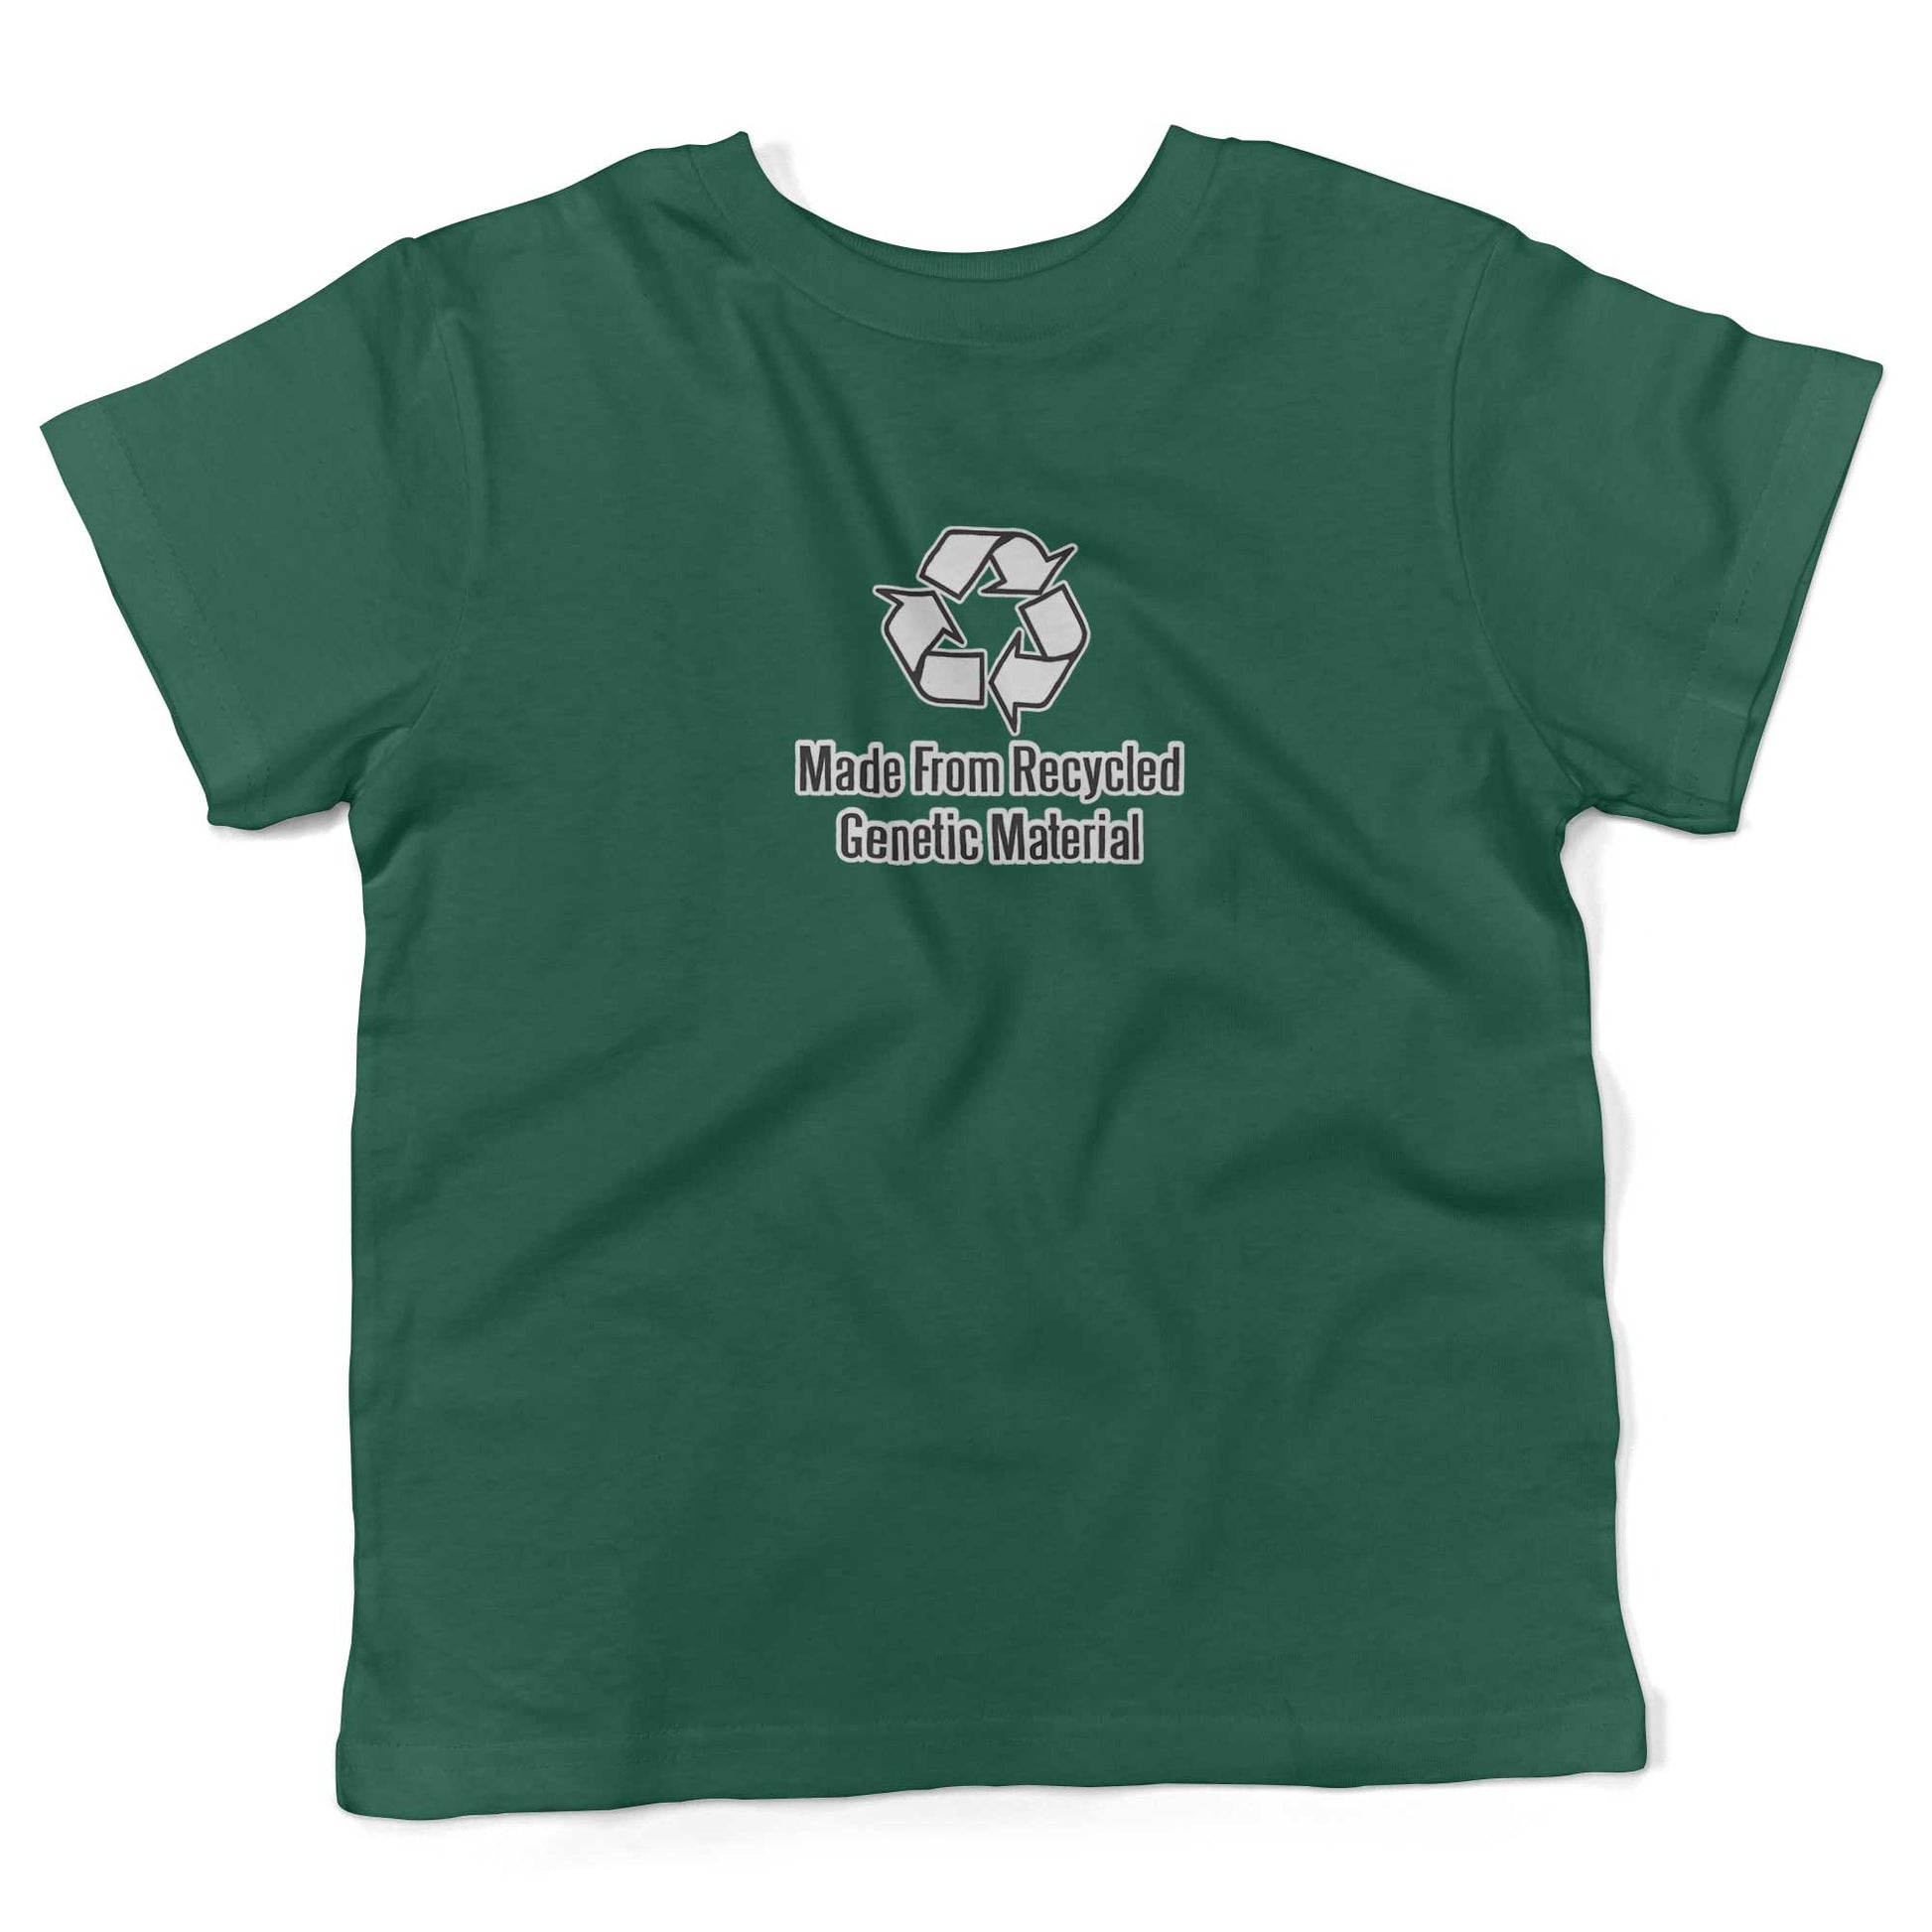 Made From Recycled Materials Toddler Shirt-Kelly Green-2T